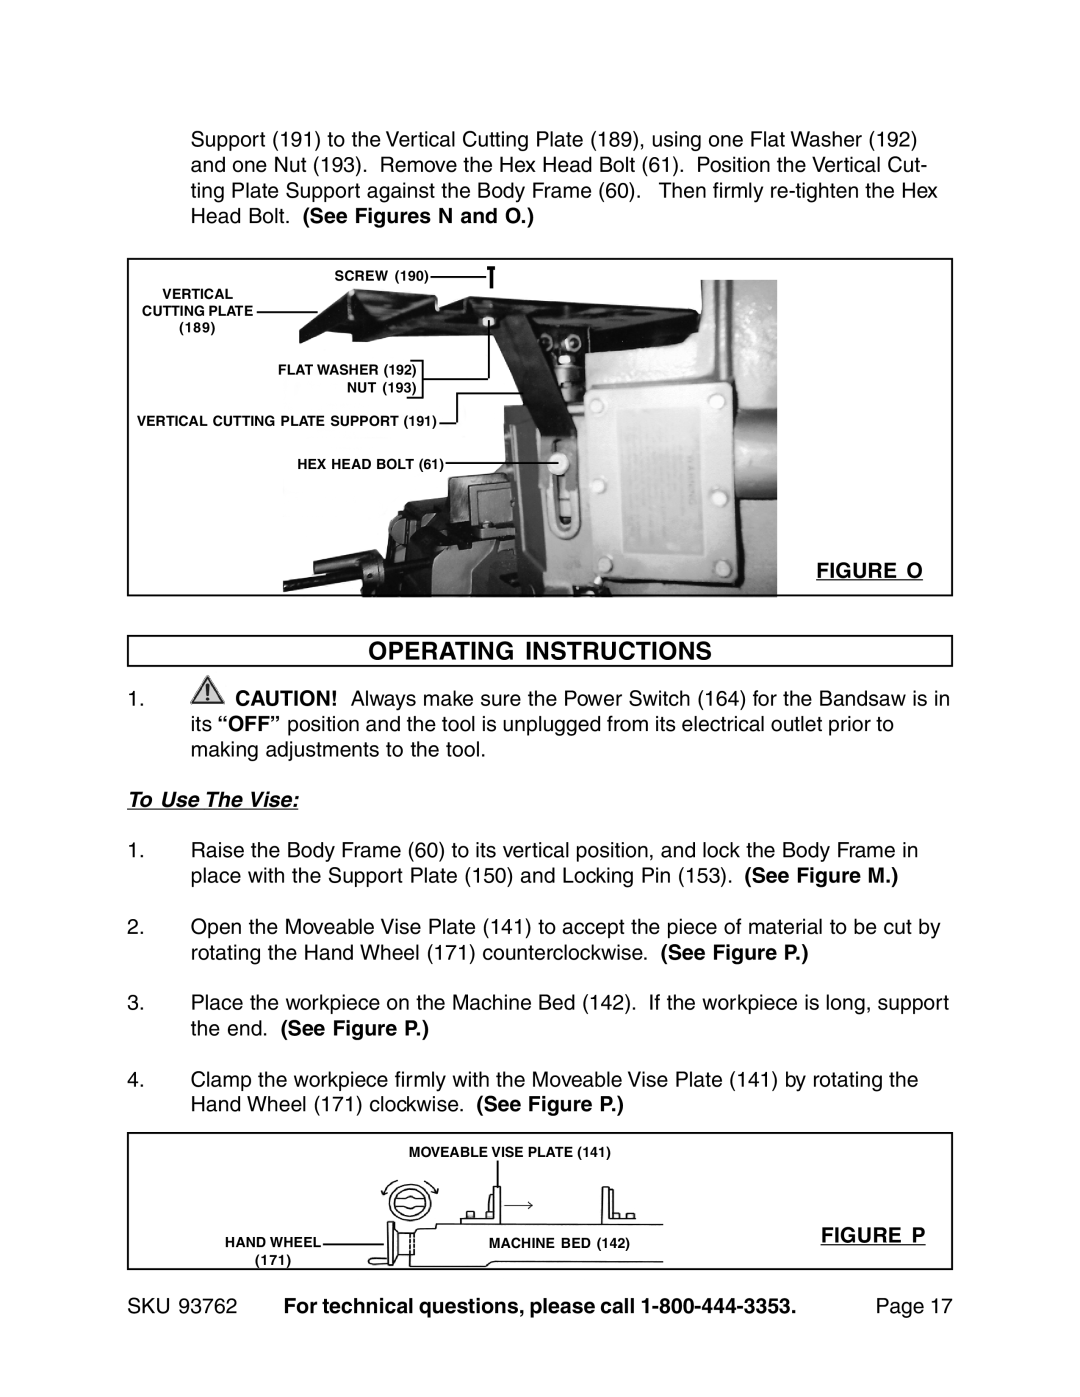 Harbor Freight Tools 93762 operating instructions Operating Instructions, Figure O, To Use The Vise, Figure P 